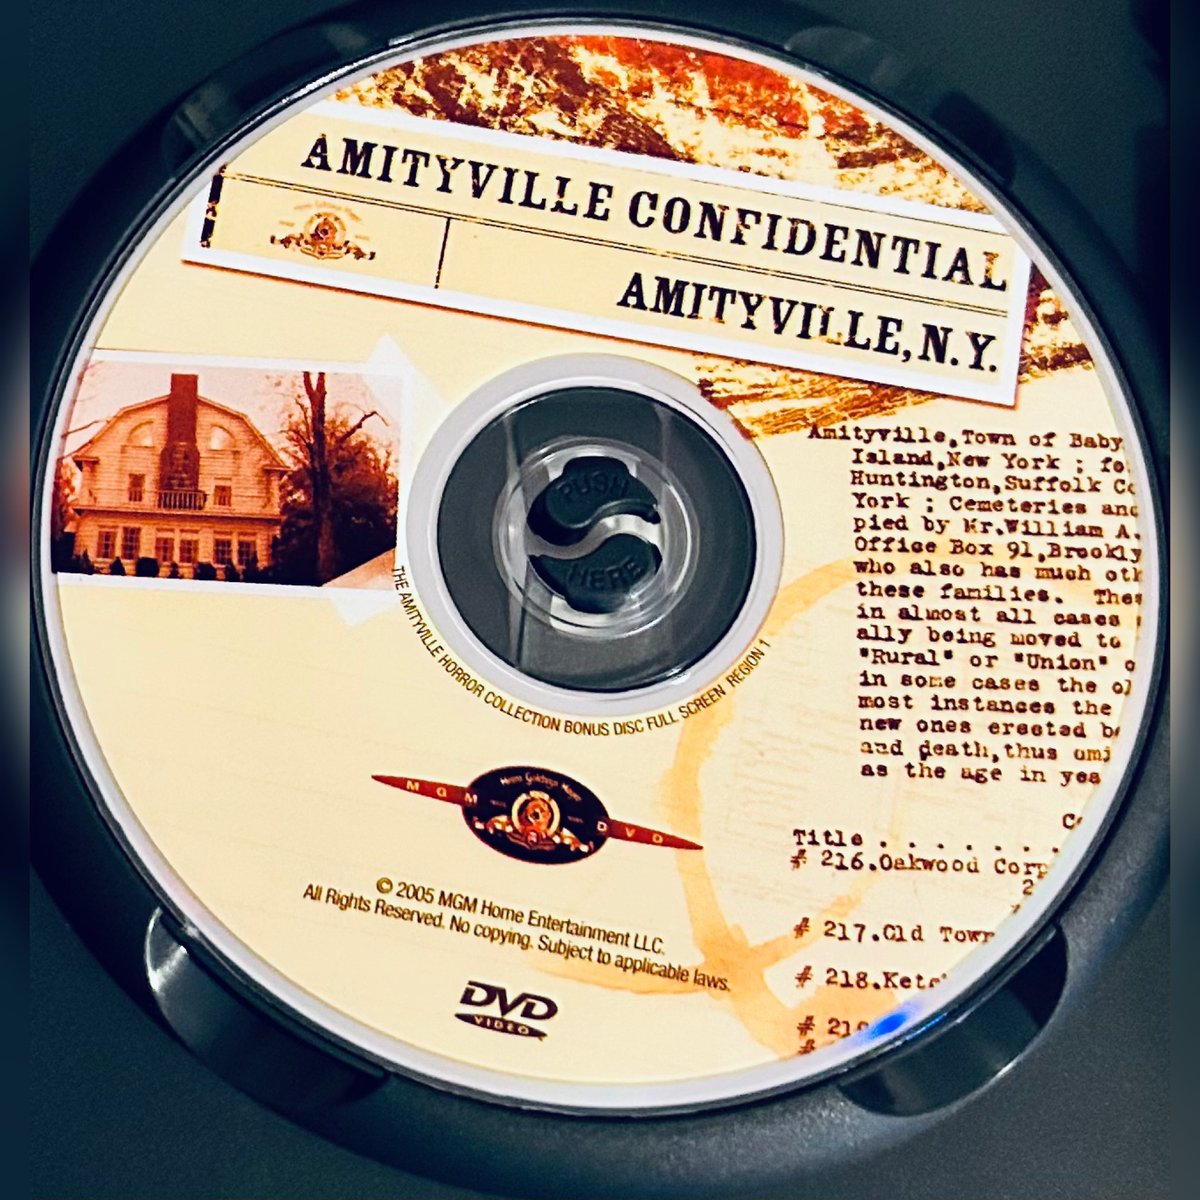 #ReStock! Amityville Confidential (DVD) Amityville N.Y. MGM History Channel Documentary

rareflicksplus.com/all-products/o…

#Amityville #AmityvilleConfidential #AmityvilleNY #MGM #History #HistoryChannel #Documentary #DVD #DVDs #PhysicalMedia #horror